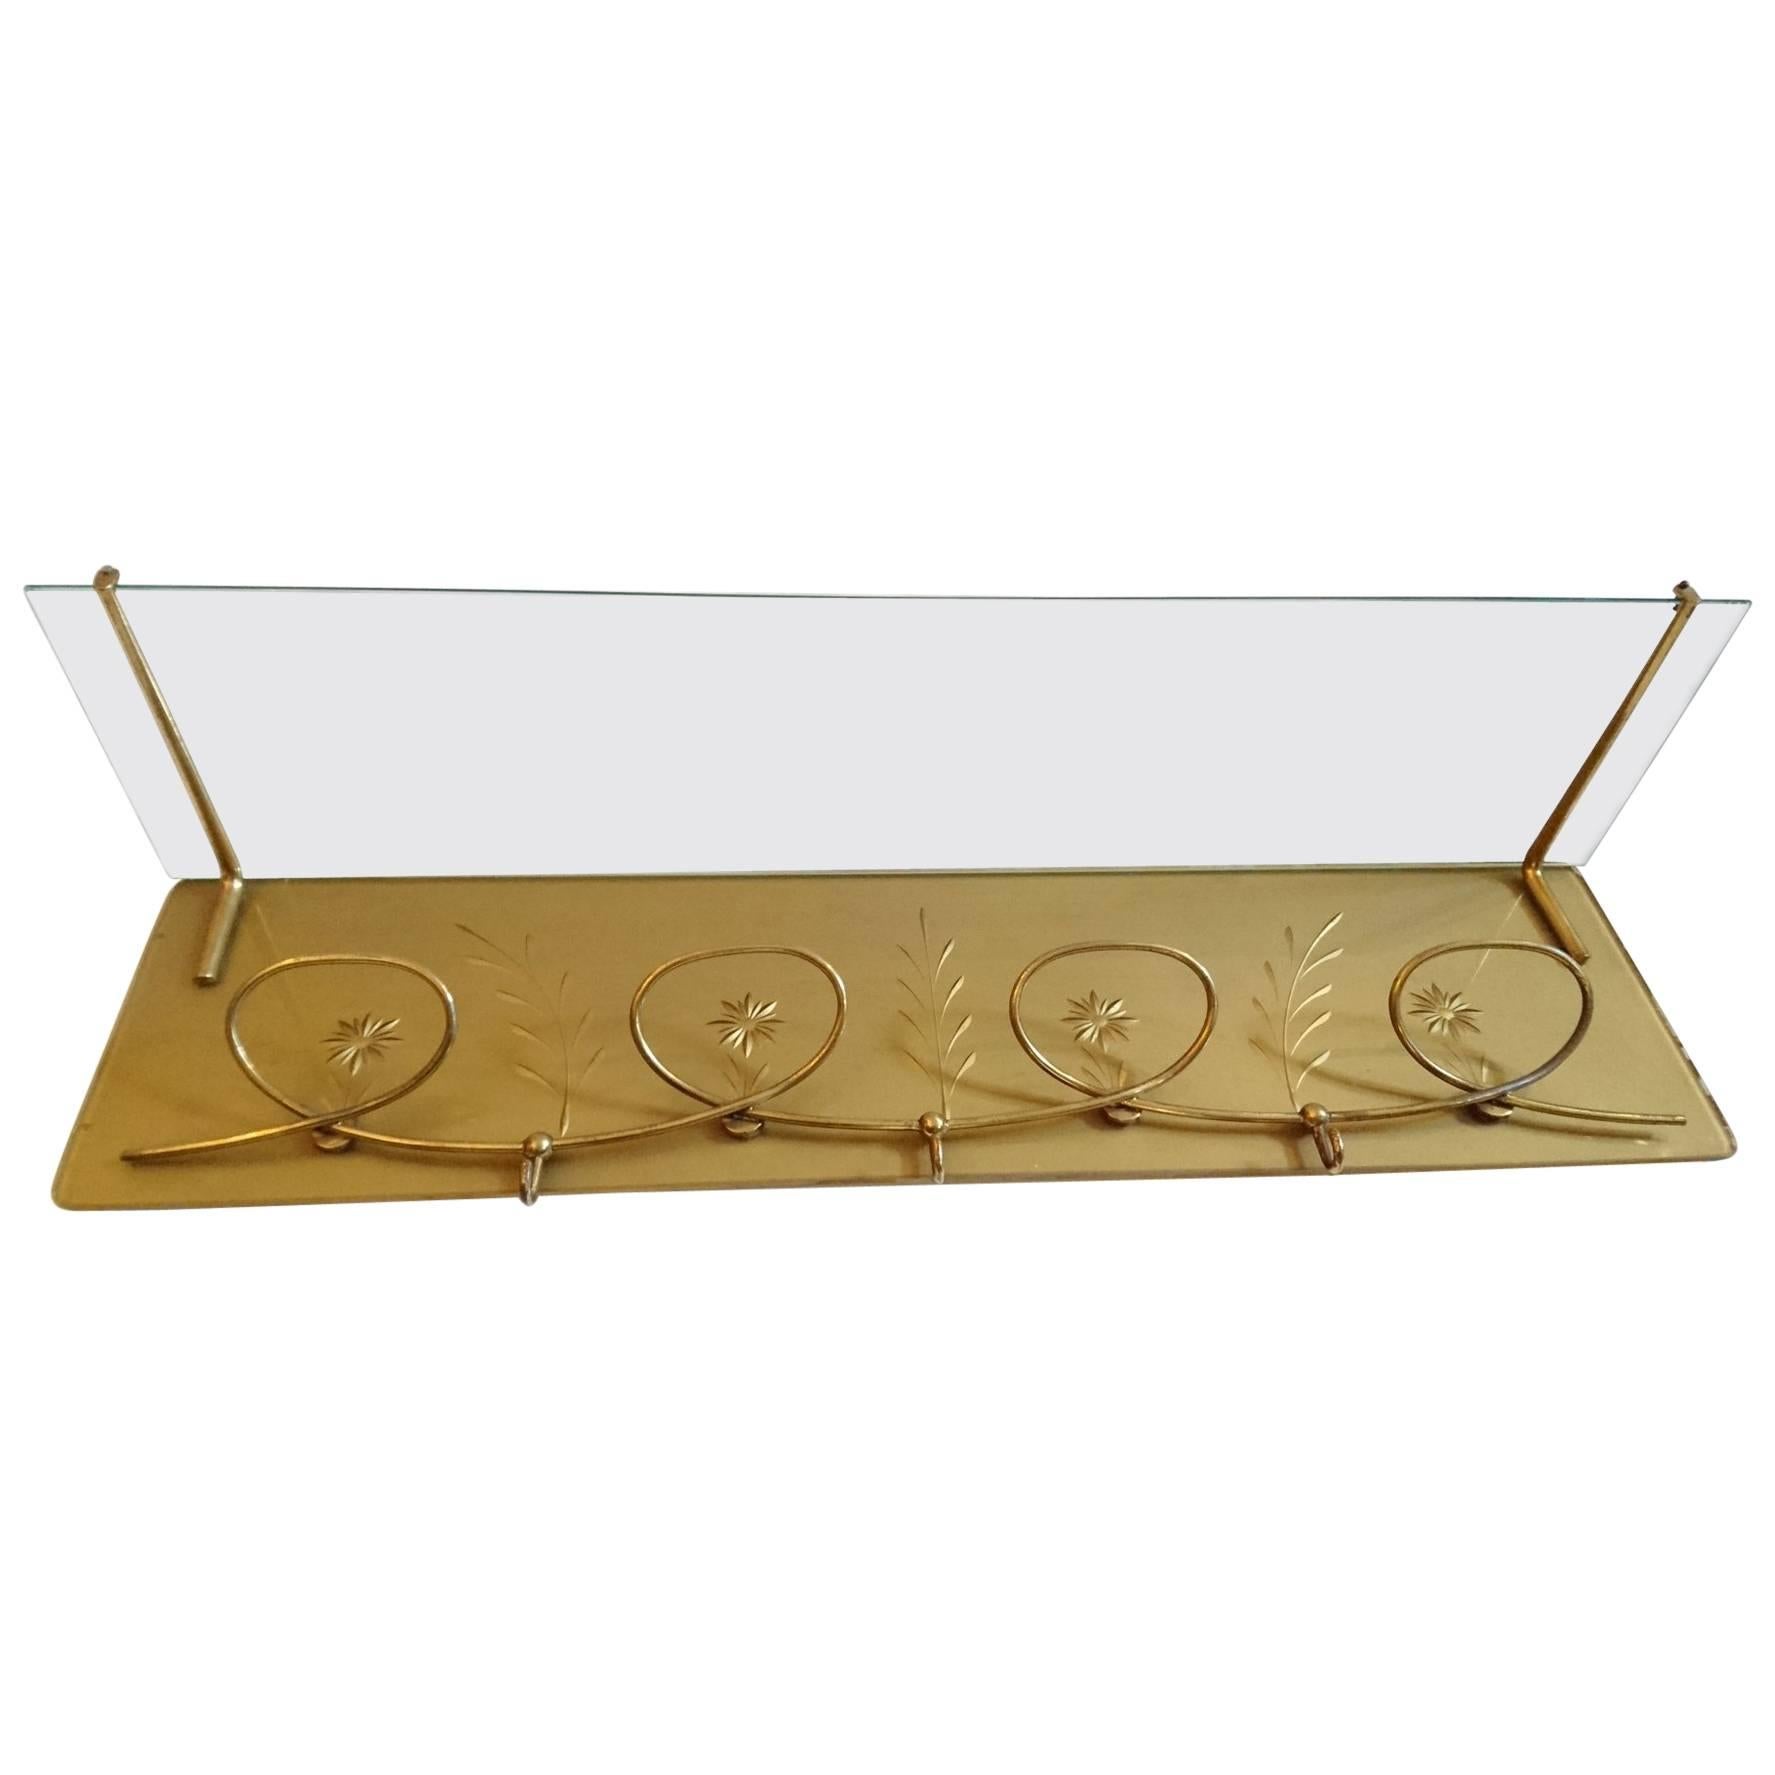 Elegant wall-mounted coat rack with a playful design in glass and brass and decorated with engraved flowers on gold base.